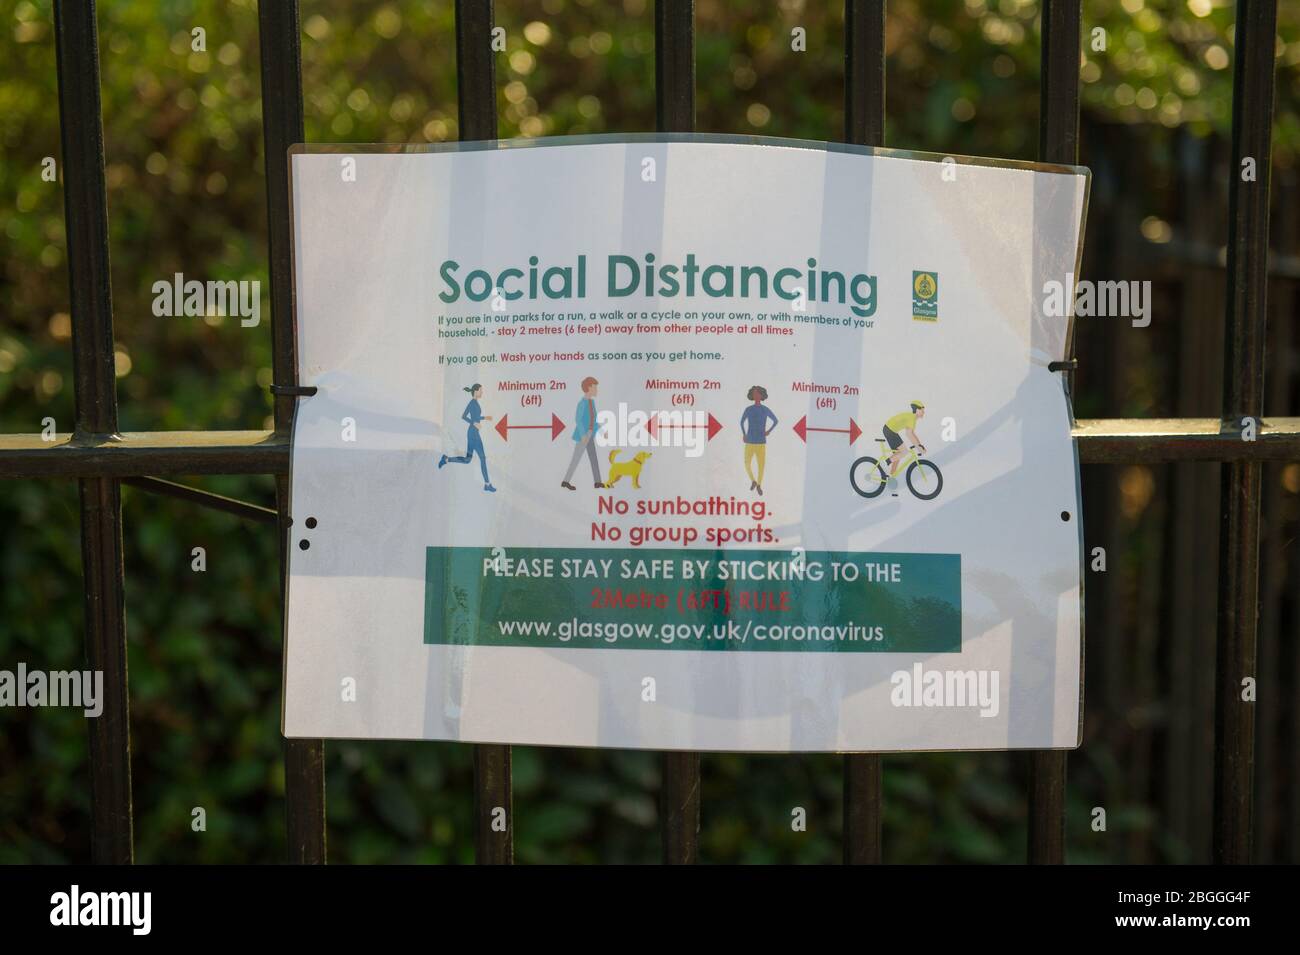 Glasgow, UK. 21st Apr, 2020. Pictured: Sign on park gate advising people on social distancing in the park. Scenes from Kelvingrove Park in Glasgow during the coronavirus (COVID-19) lockdown. Credit: Colin Fisher/Alamy Live News Stock Photo